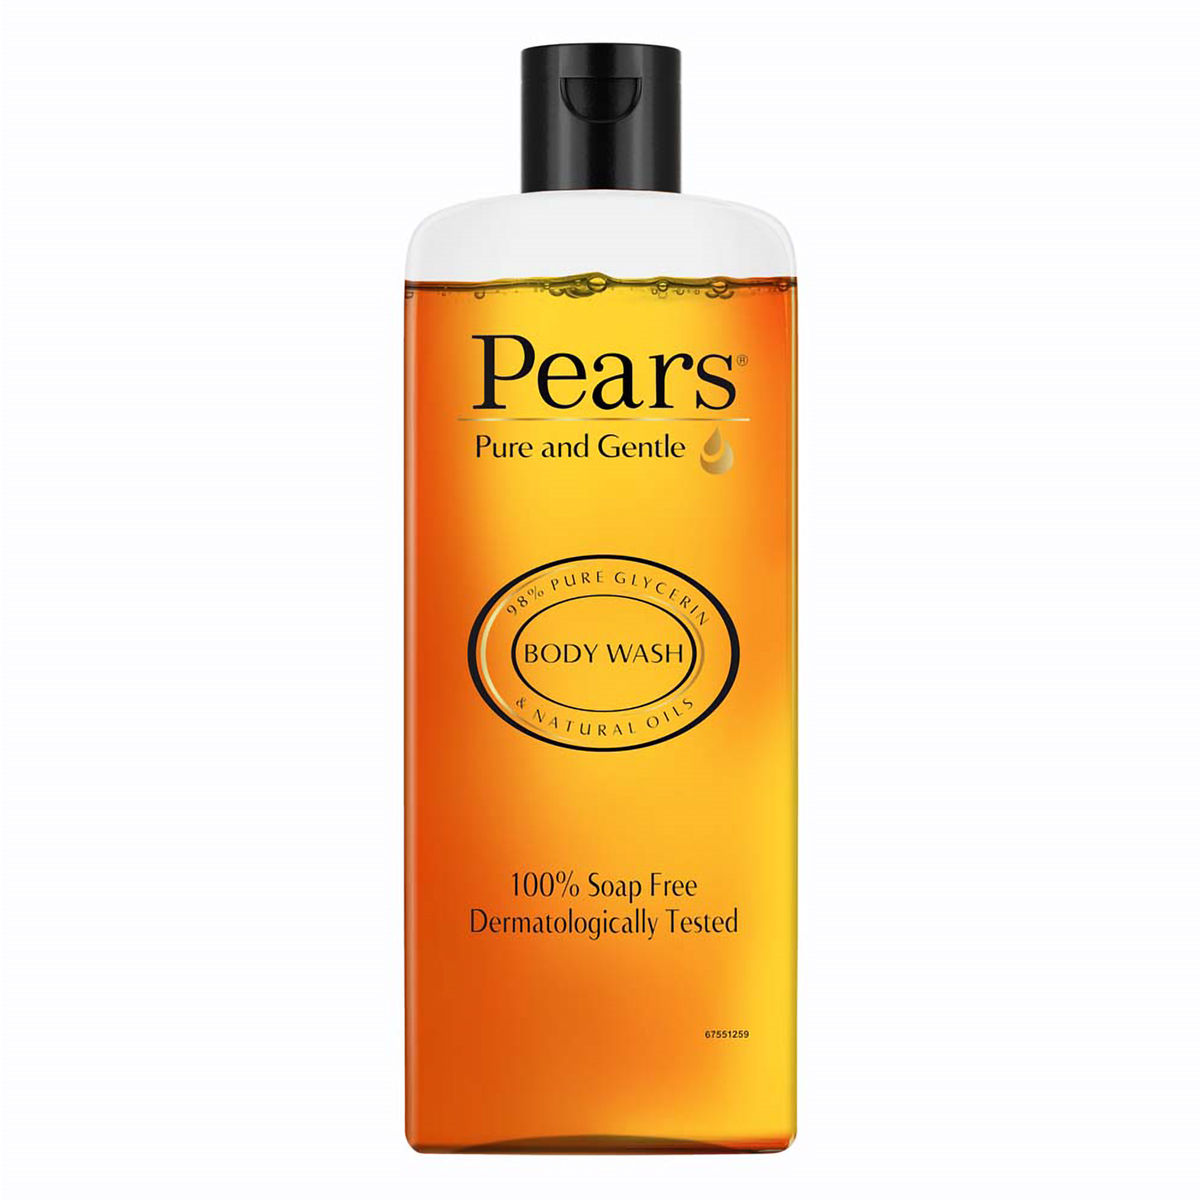 Buy Pears Pure and Gentle Body Wash, 250 ml Online